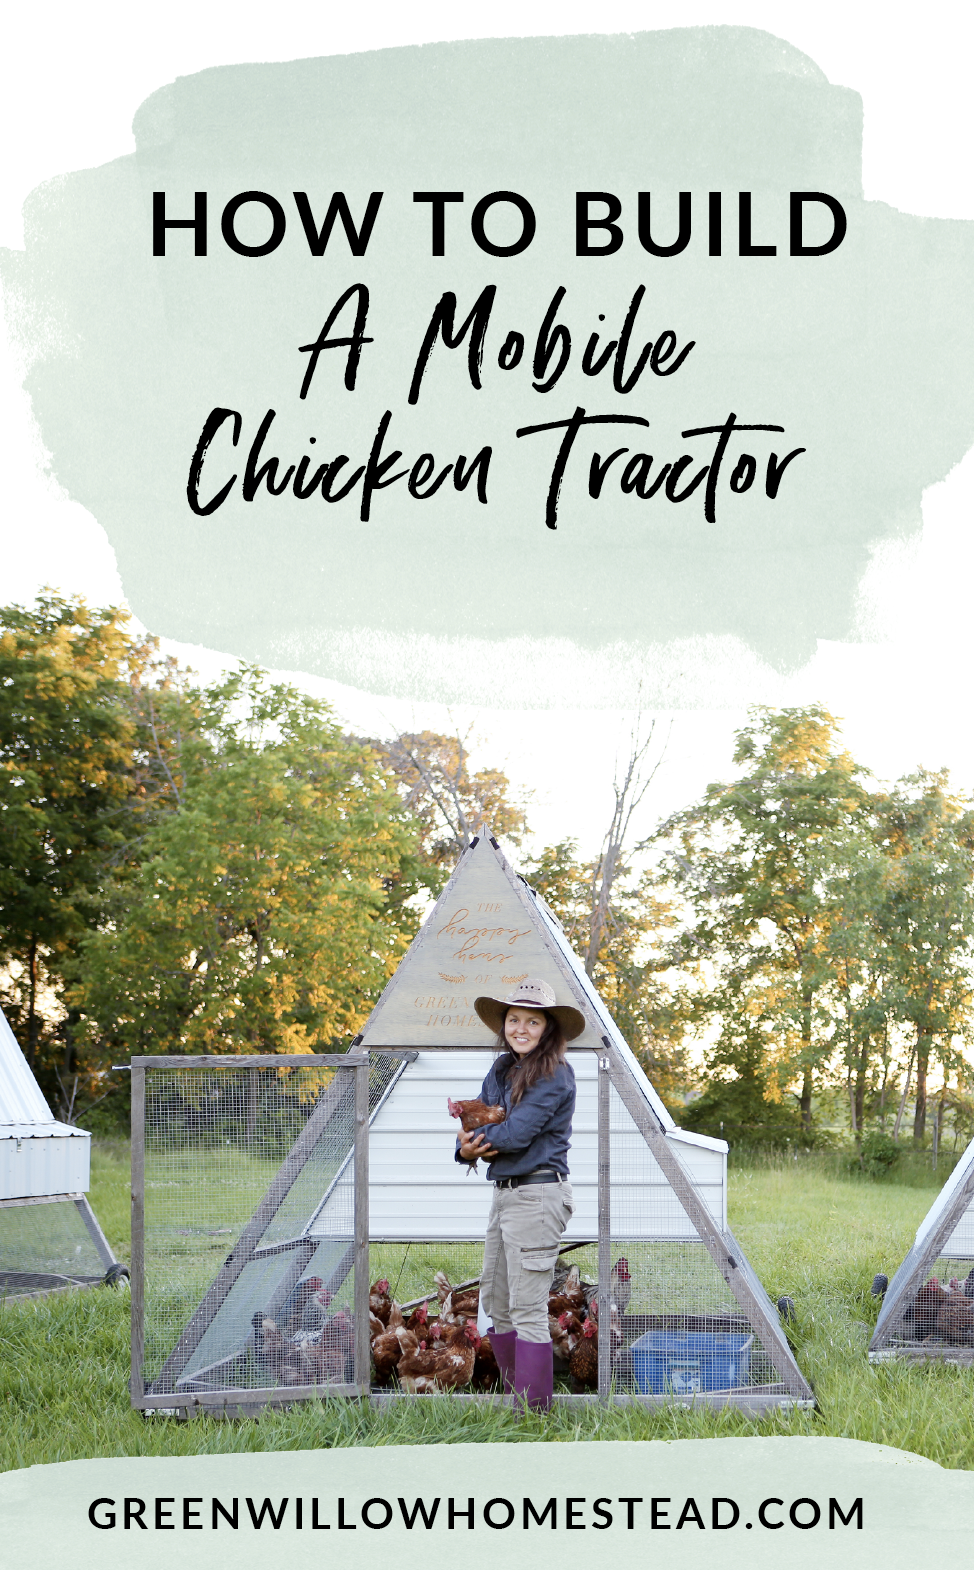 How to build a mobile chicken tractor to put your backyard chickens safely on pasture